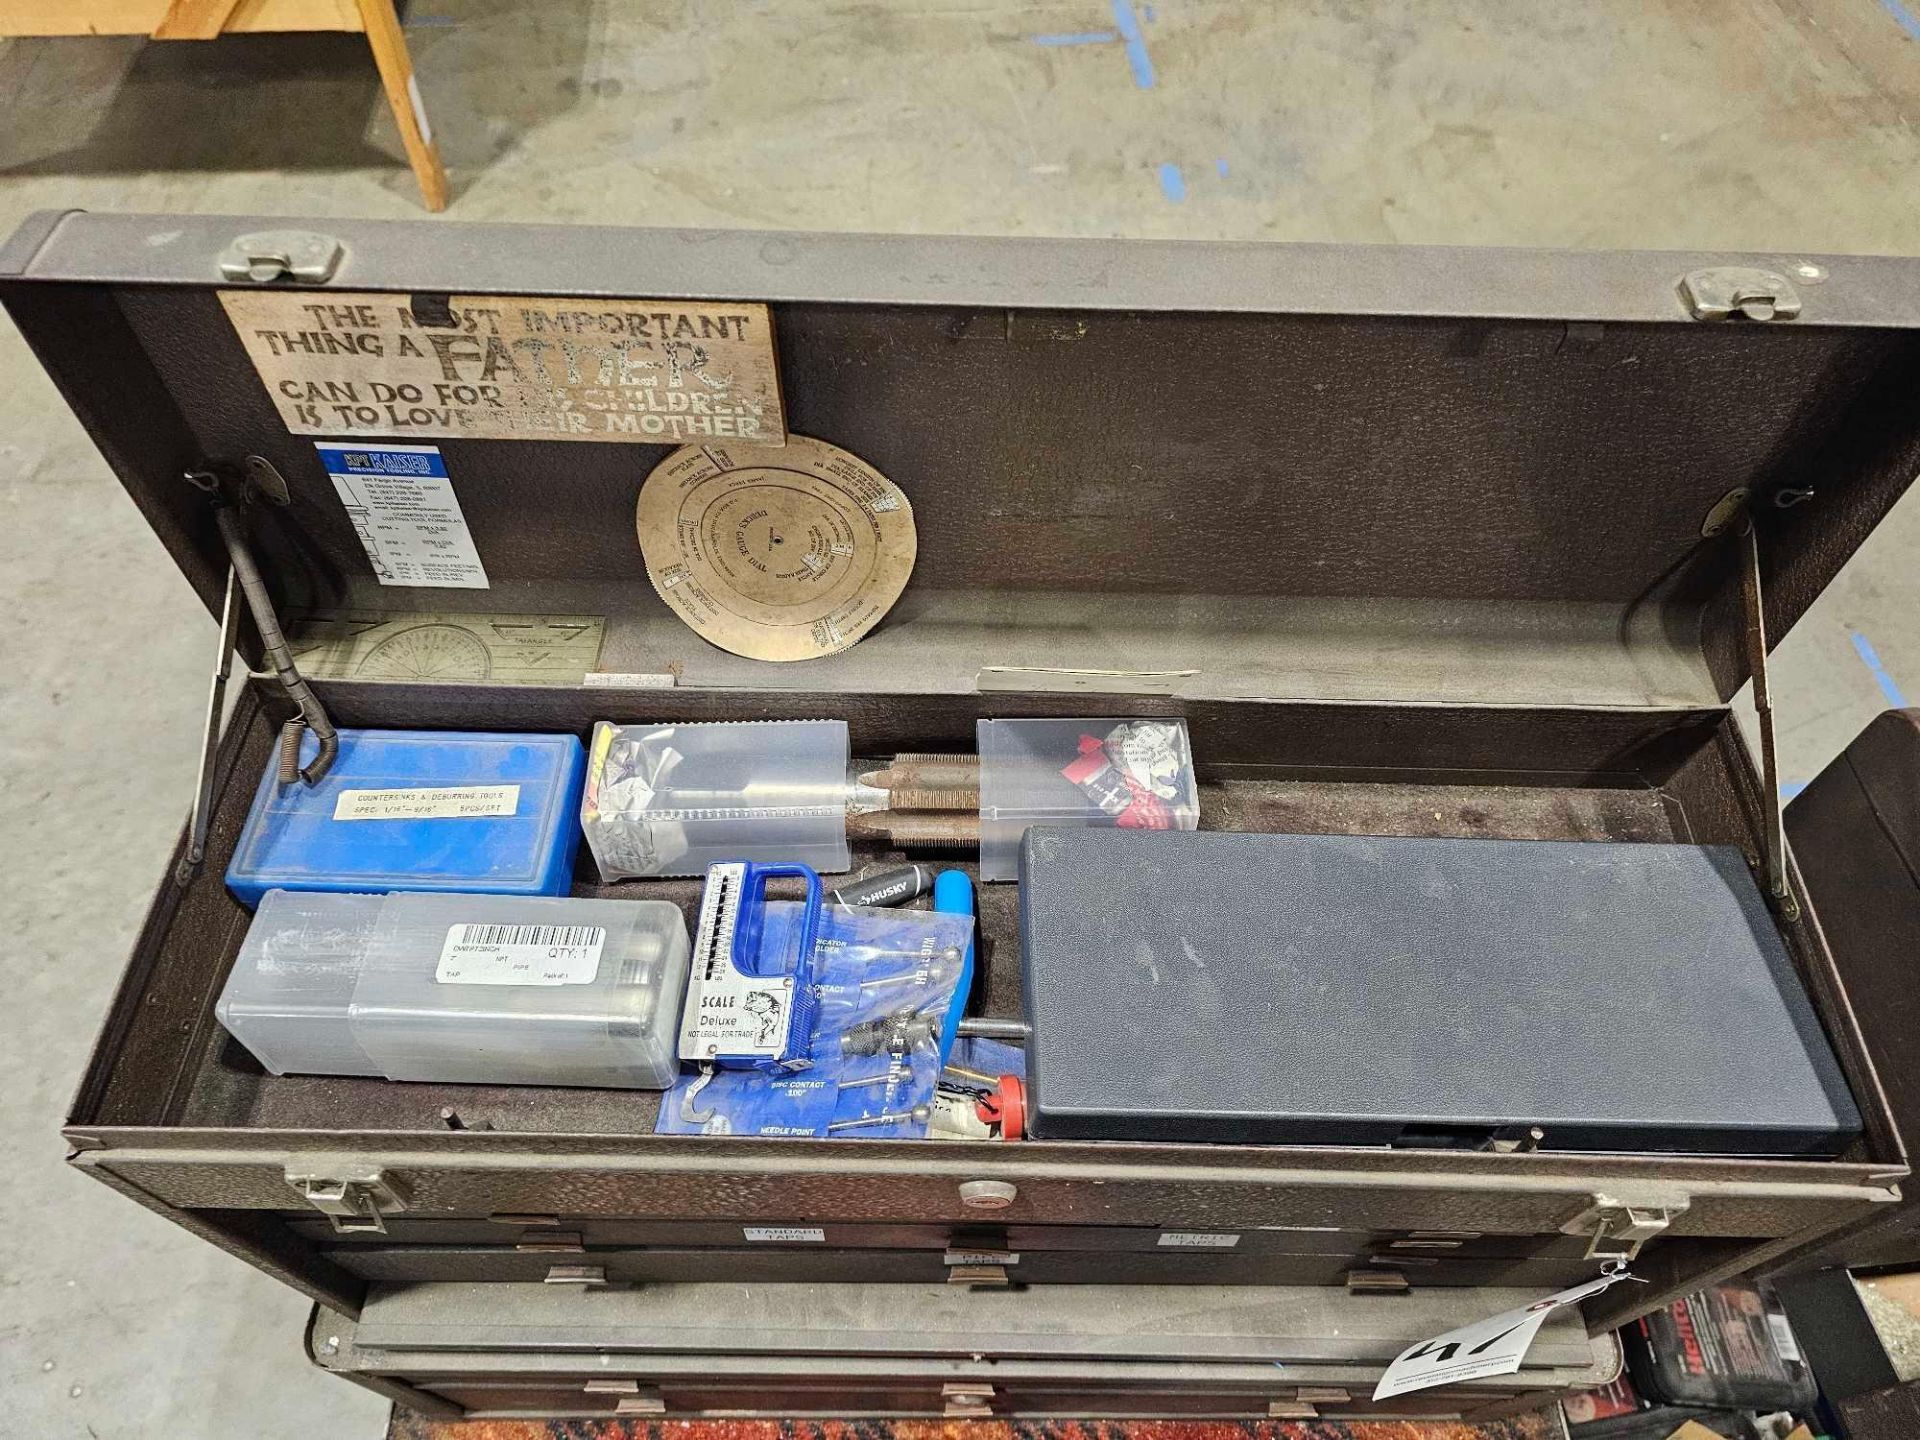 KENNEDY TOOL BOXES LOADED WITH MACHINISTS TOOLS AND MEASURING DEVICES - Image 5 of 45